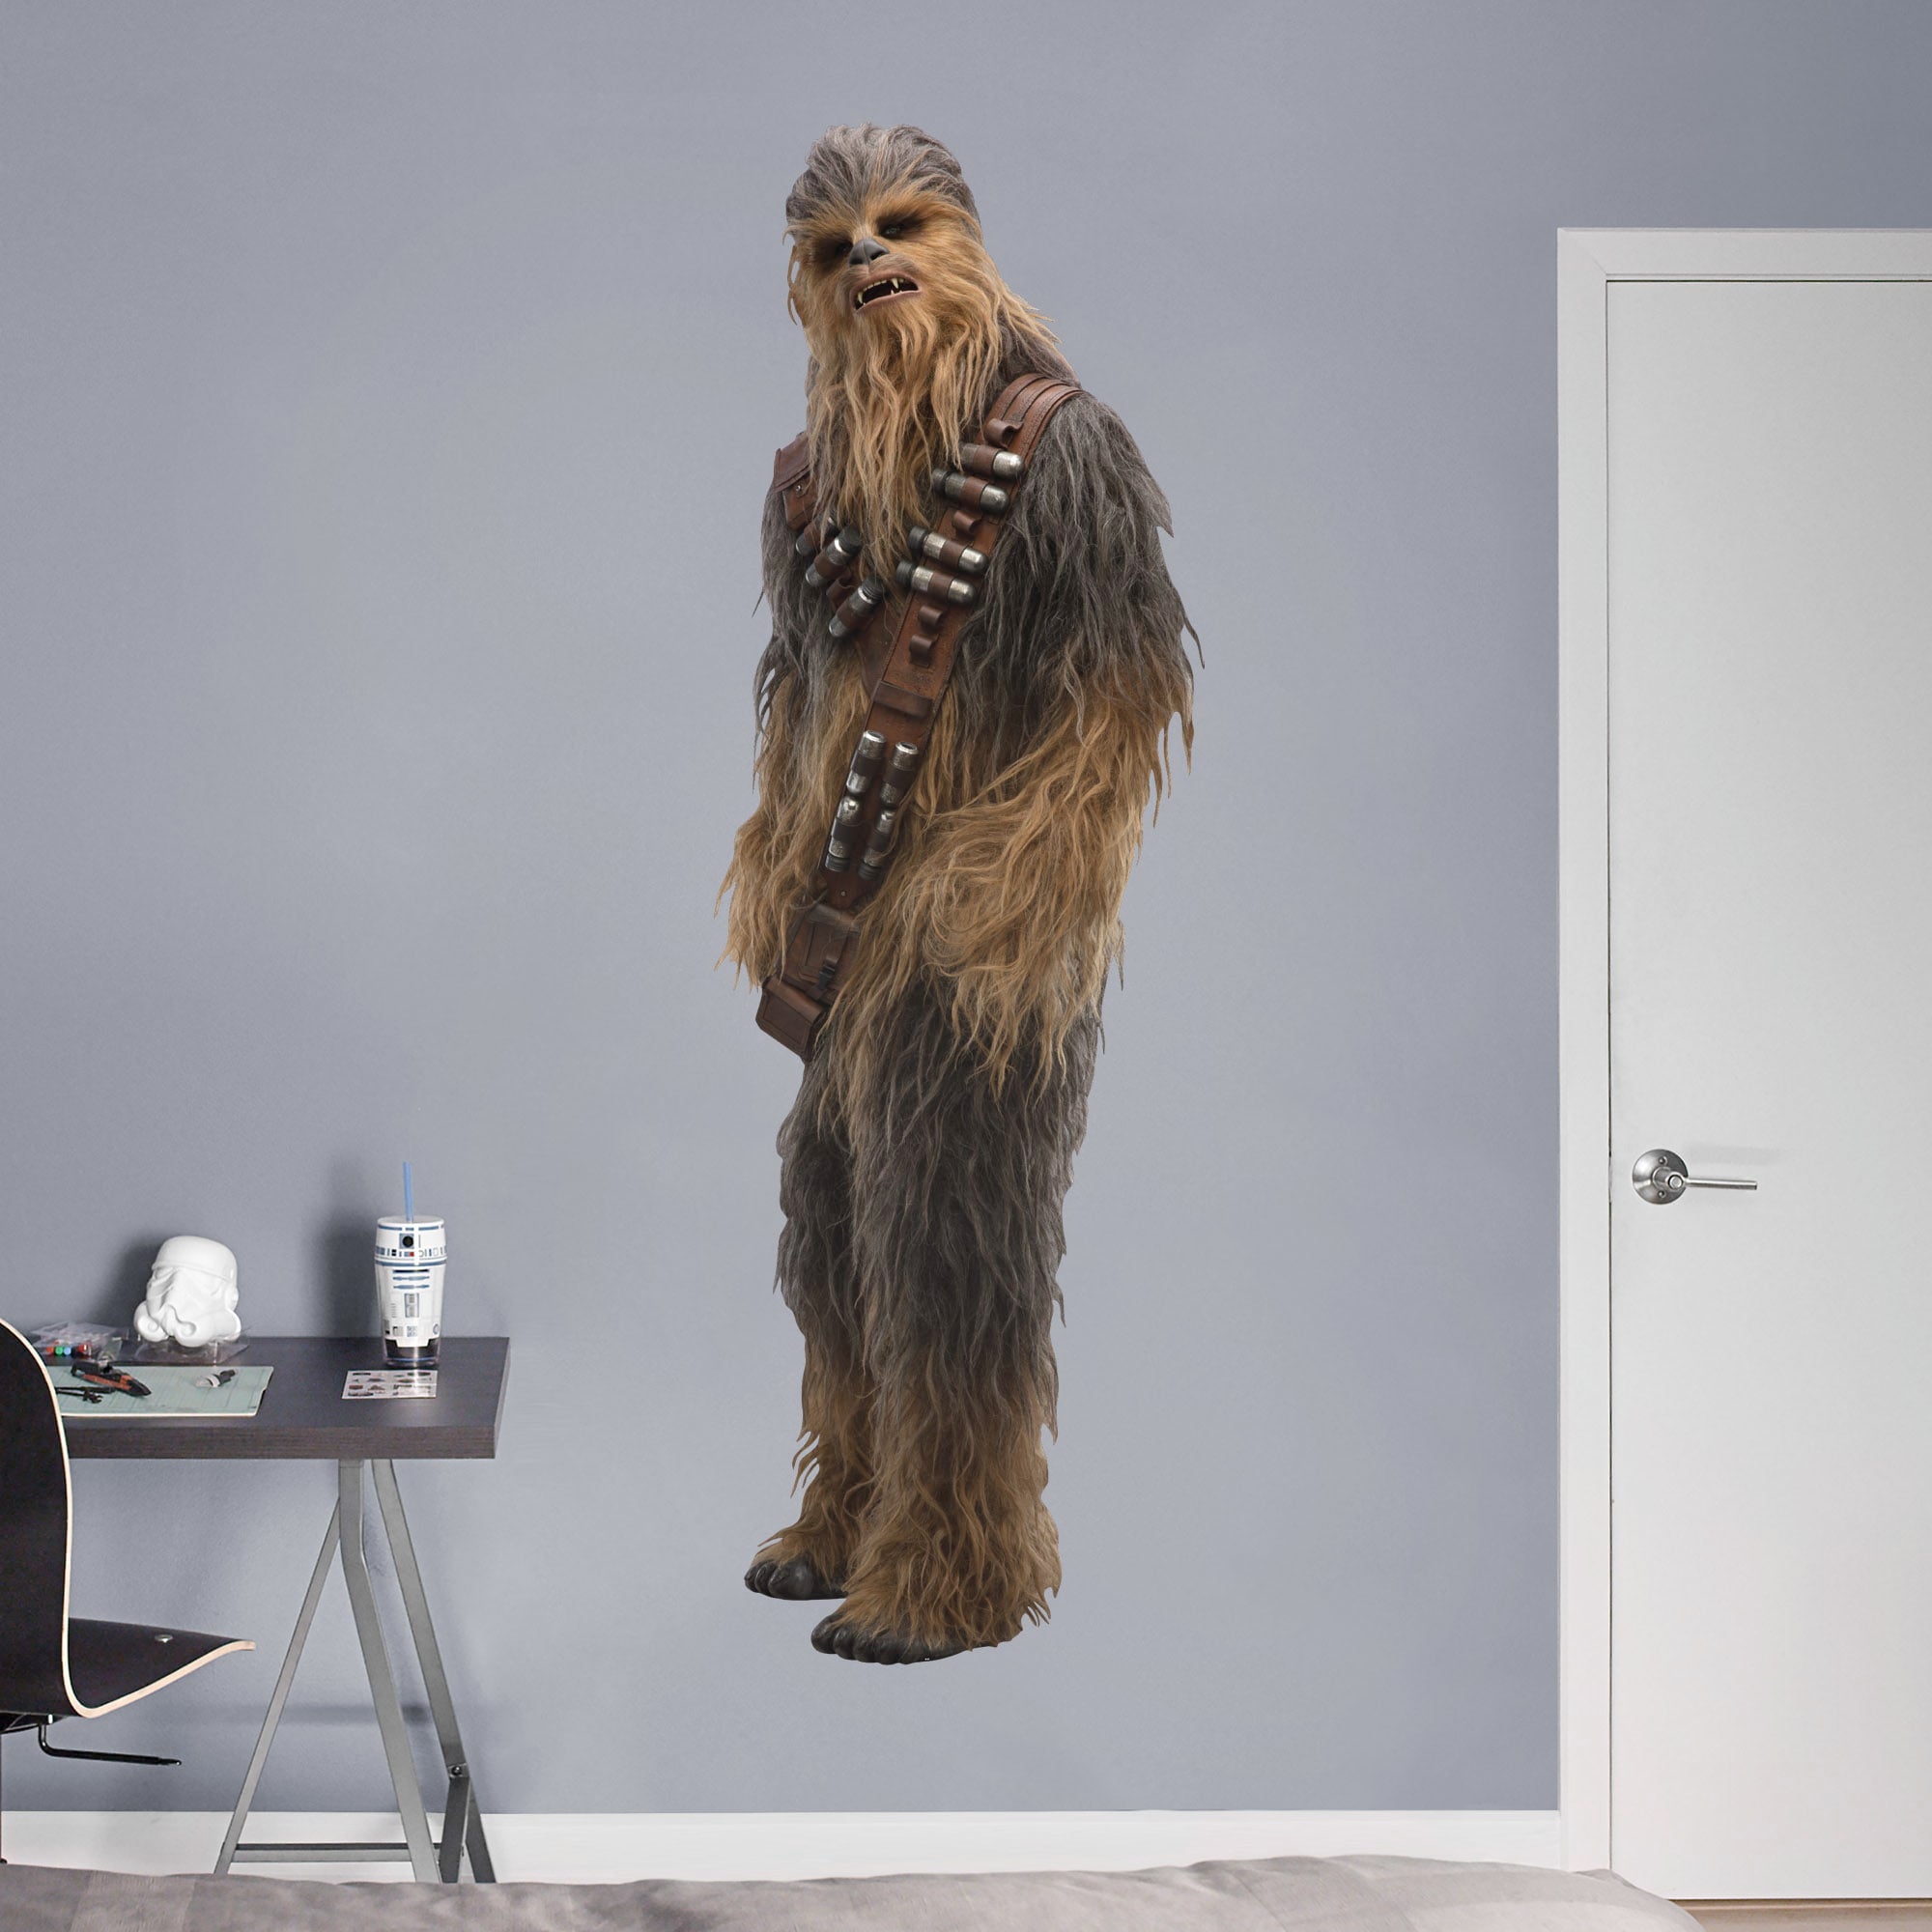 Chewbacca - Solo: A Star Wars Story - Officially Licensed Removable Wall Decal Life-Size Character + 2 Decals (25"W x 78"H) by F